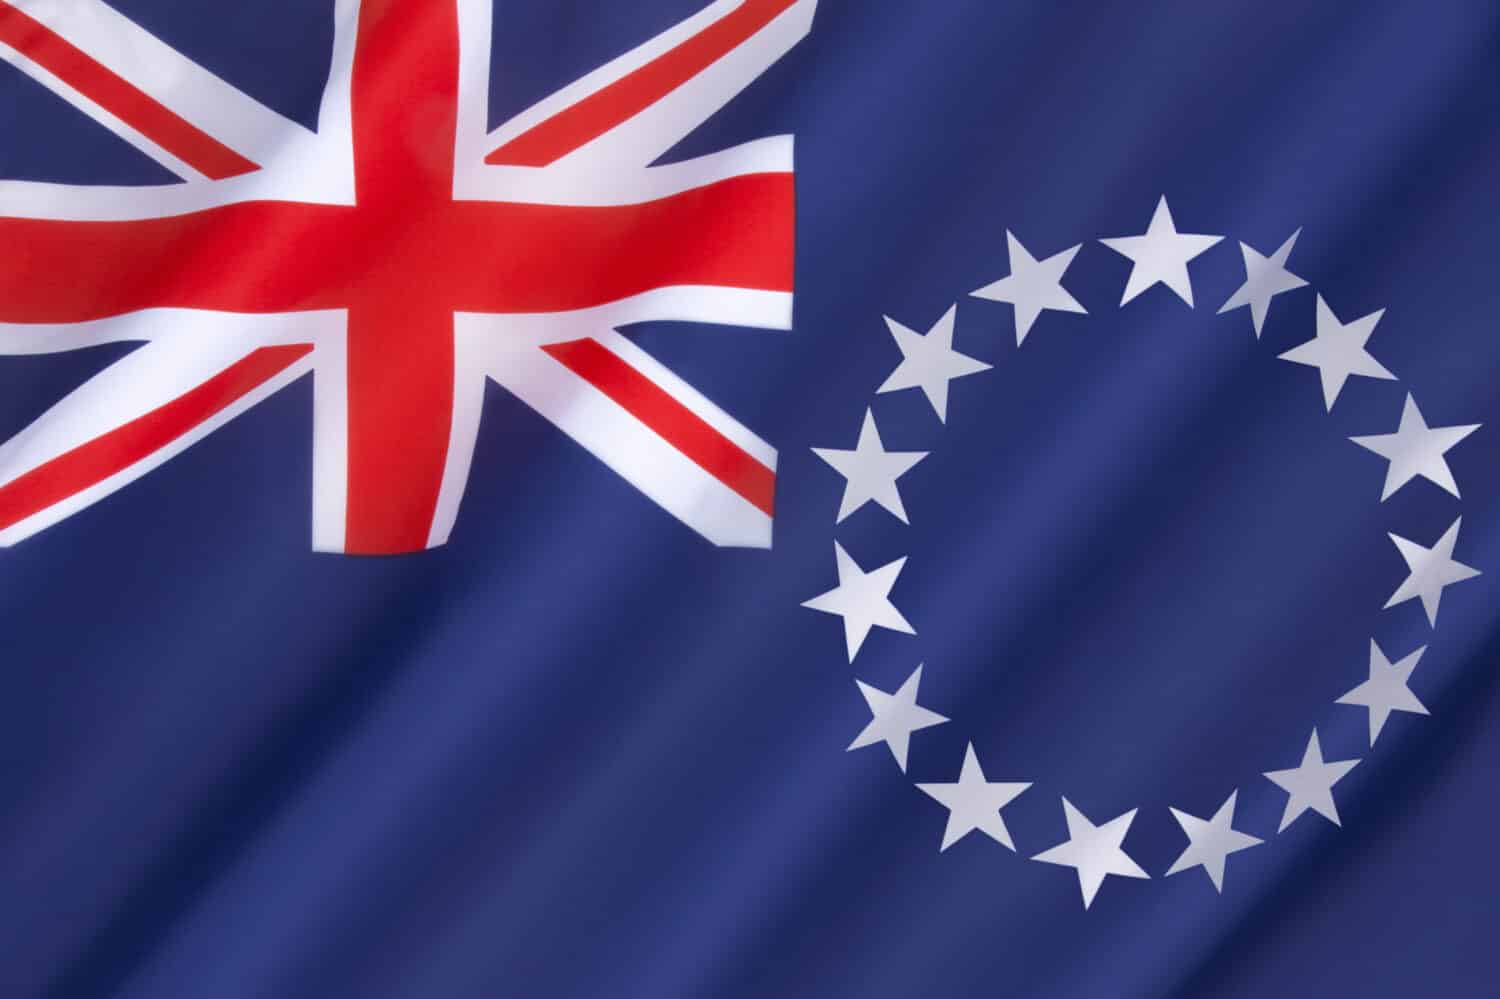 Flag of the Cook Islands - officially known as the Cook Islands Ensign, is based on the traditional design for former British colonies in the Pacific region. Adopted 4th August 1979.